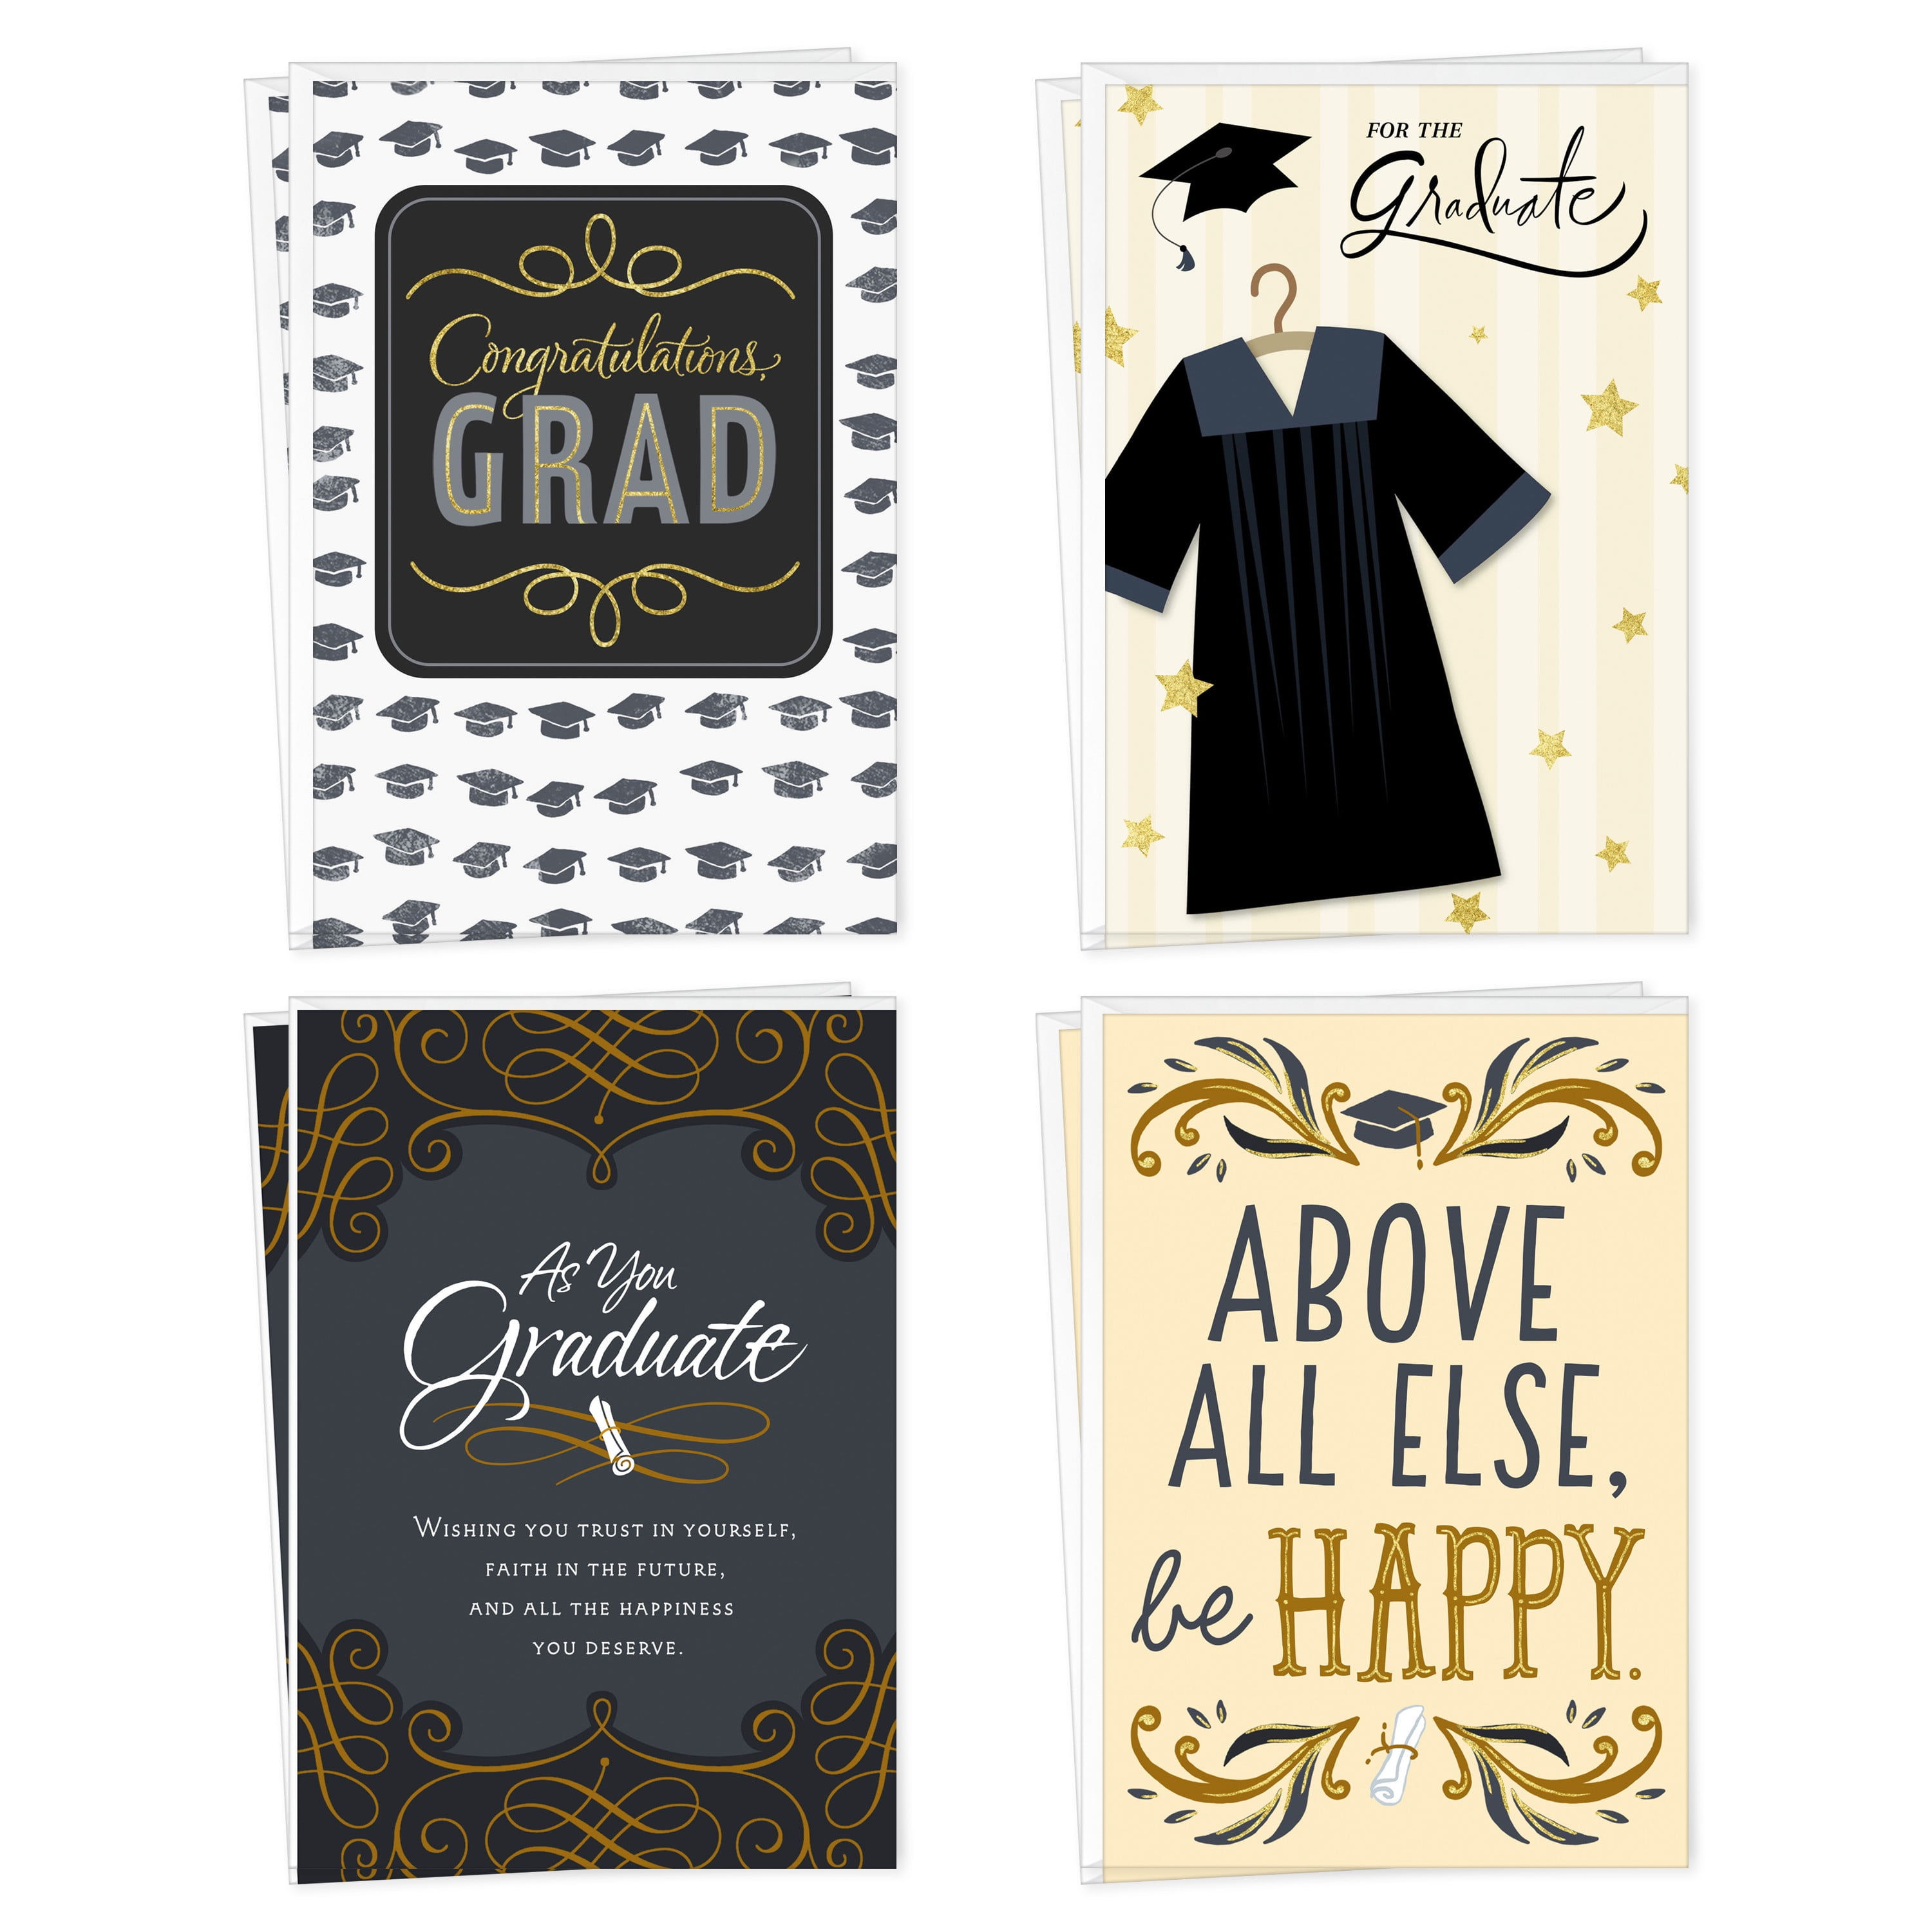 NEW Lot A39 8 Graduation Greeting Card & Envelope for ANYONE by Hallmark 